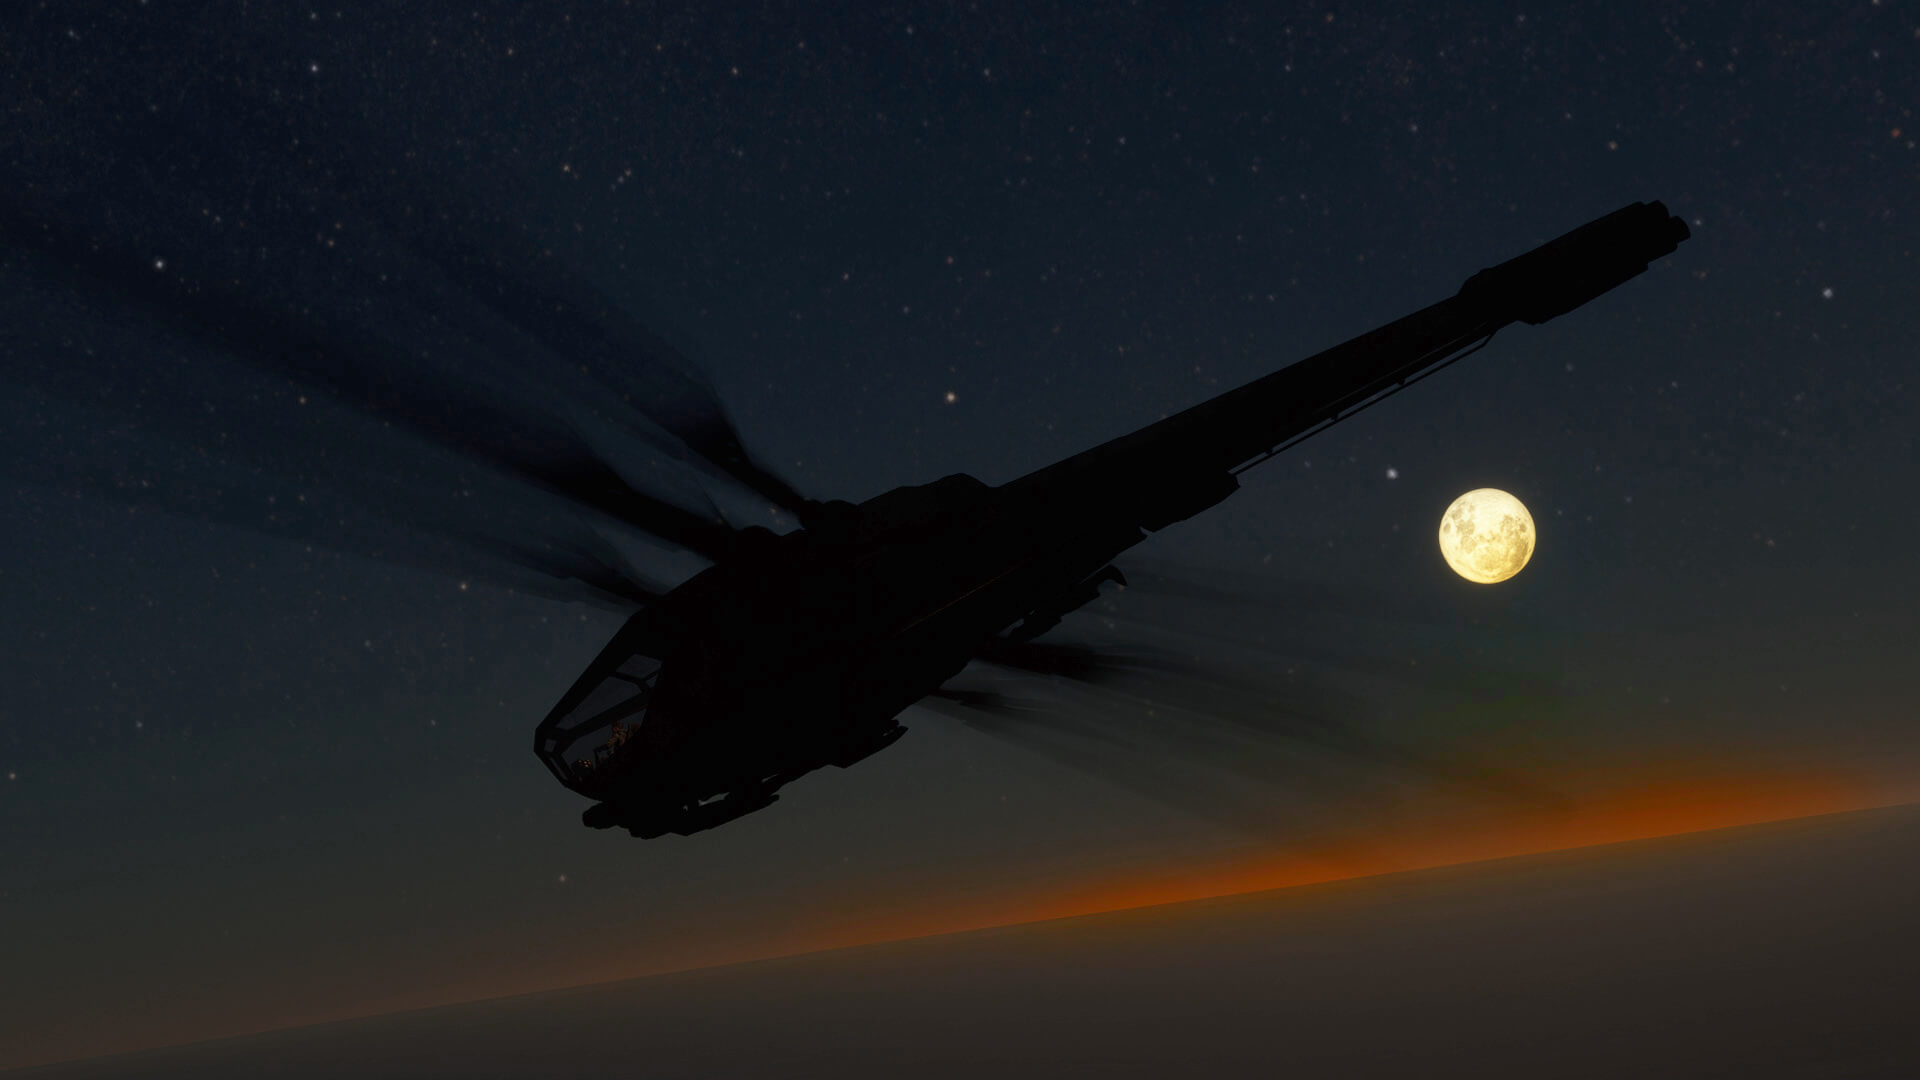 The Dune 2 Ornithopter with wings spread banks right over the ocean with the moon seen far in the distance.